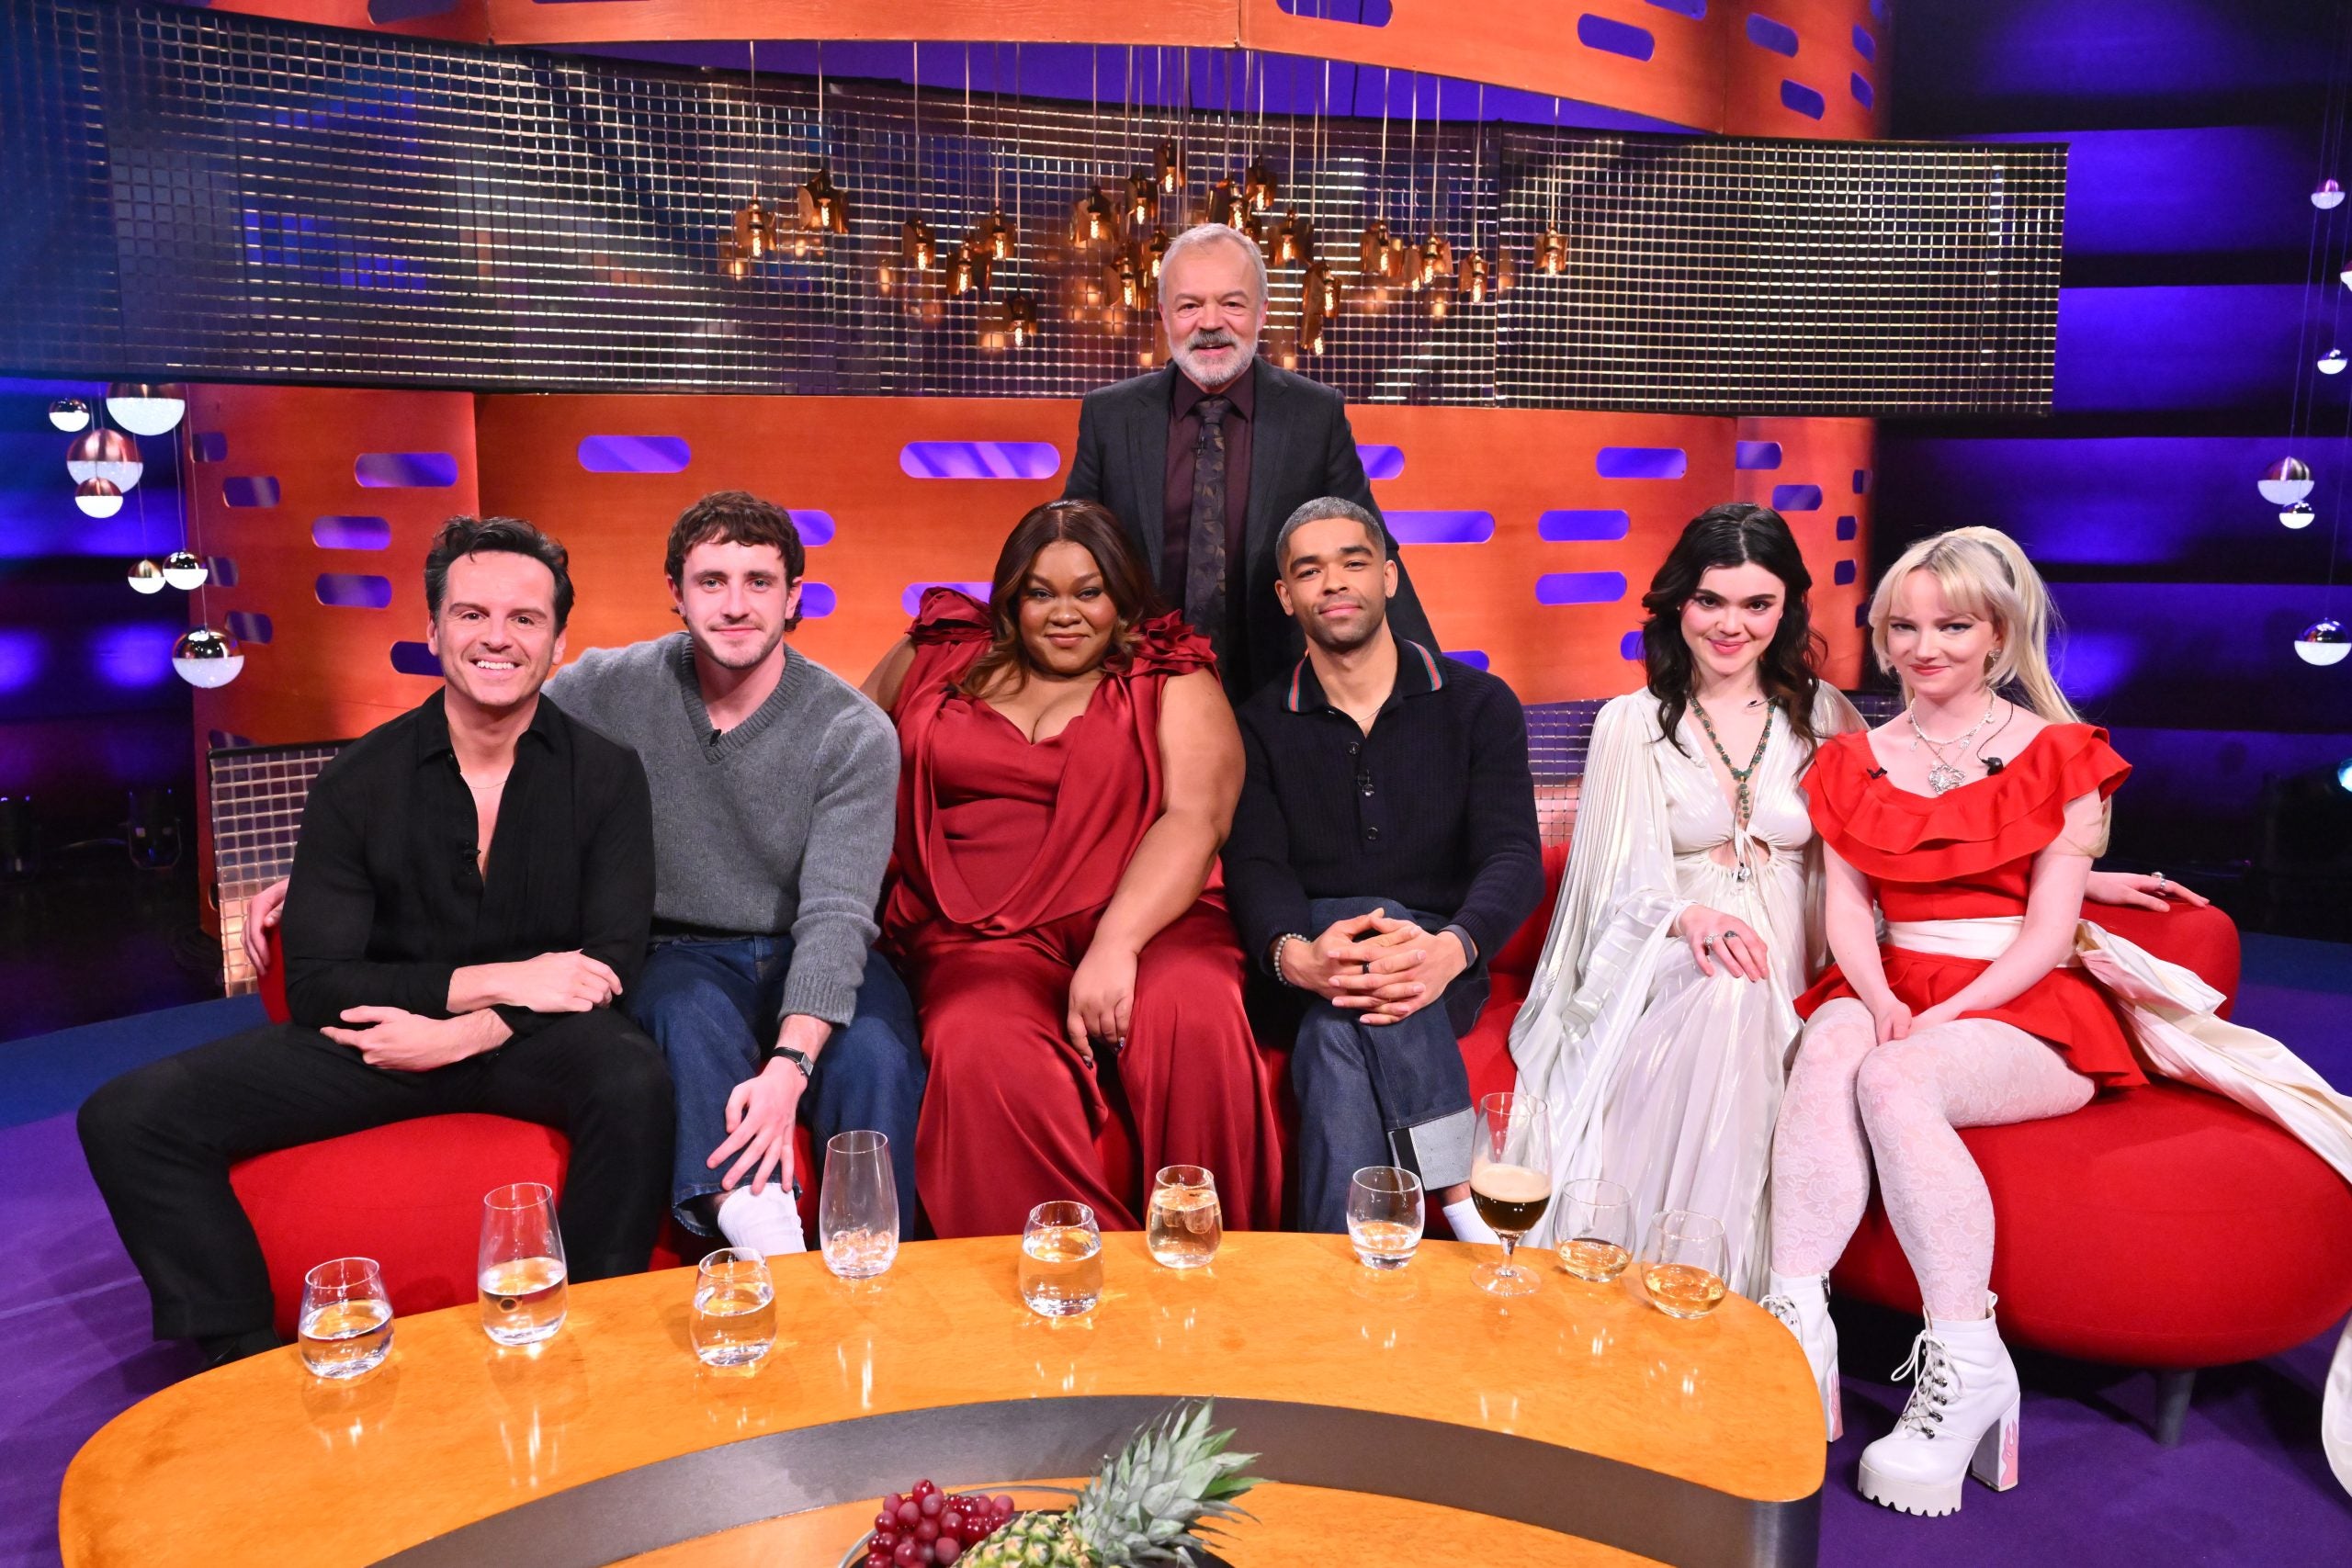 ‘Not a scoobie doo’: Graham Norton with his ‘celebrity’ guests Andrew Scott, Paul Mescal, Joy Randolph, Kingsley Ben-Adir and indie rockers The Last Dinner Party